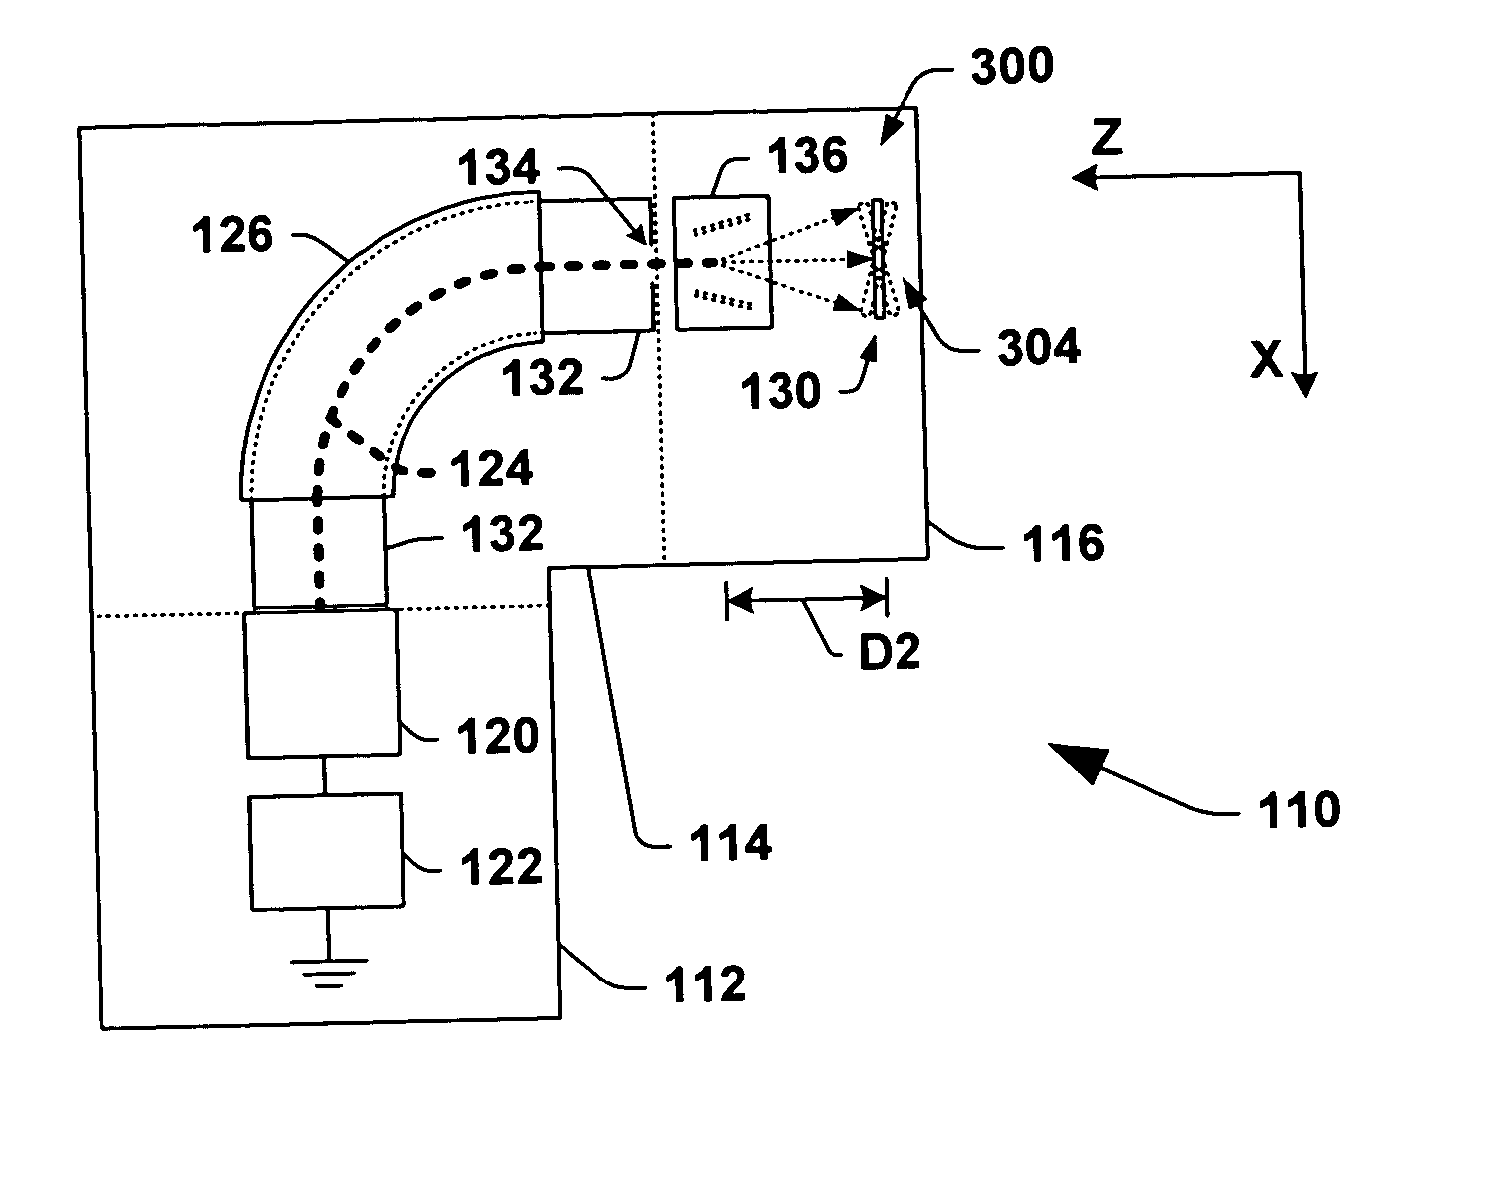 Ion beam measurement systems and methods for ion implant dose and uniformity control